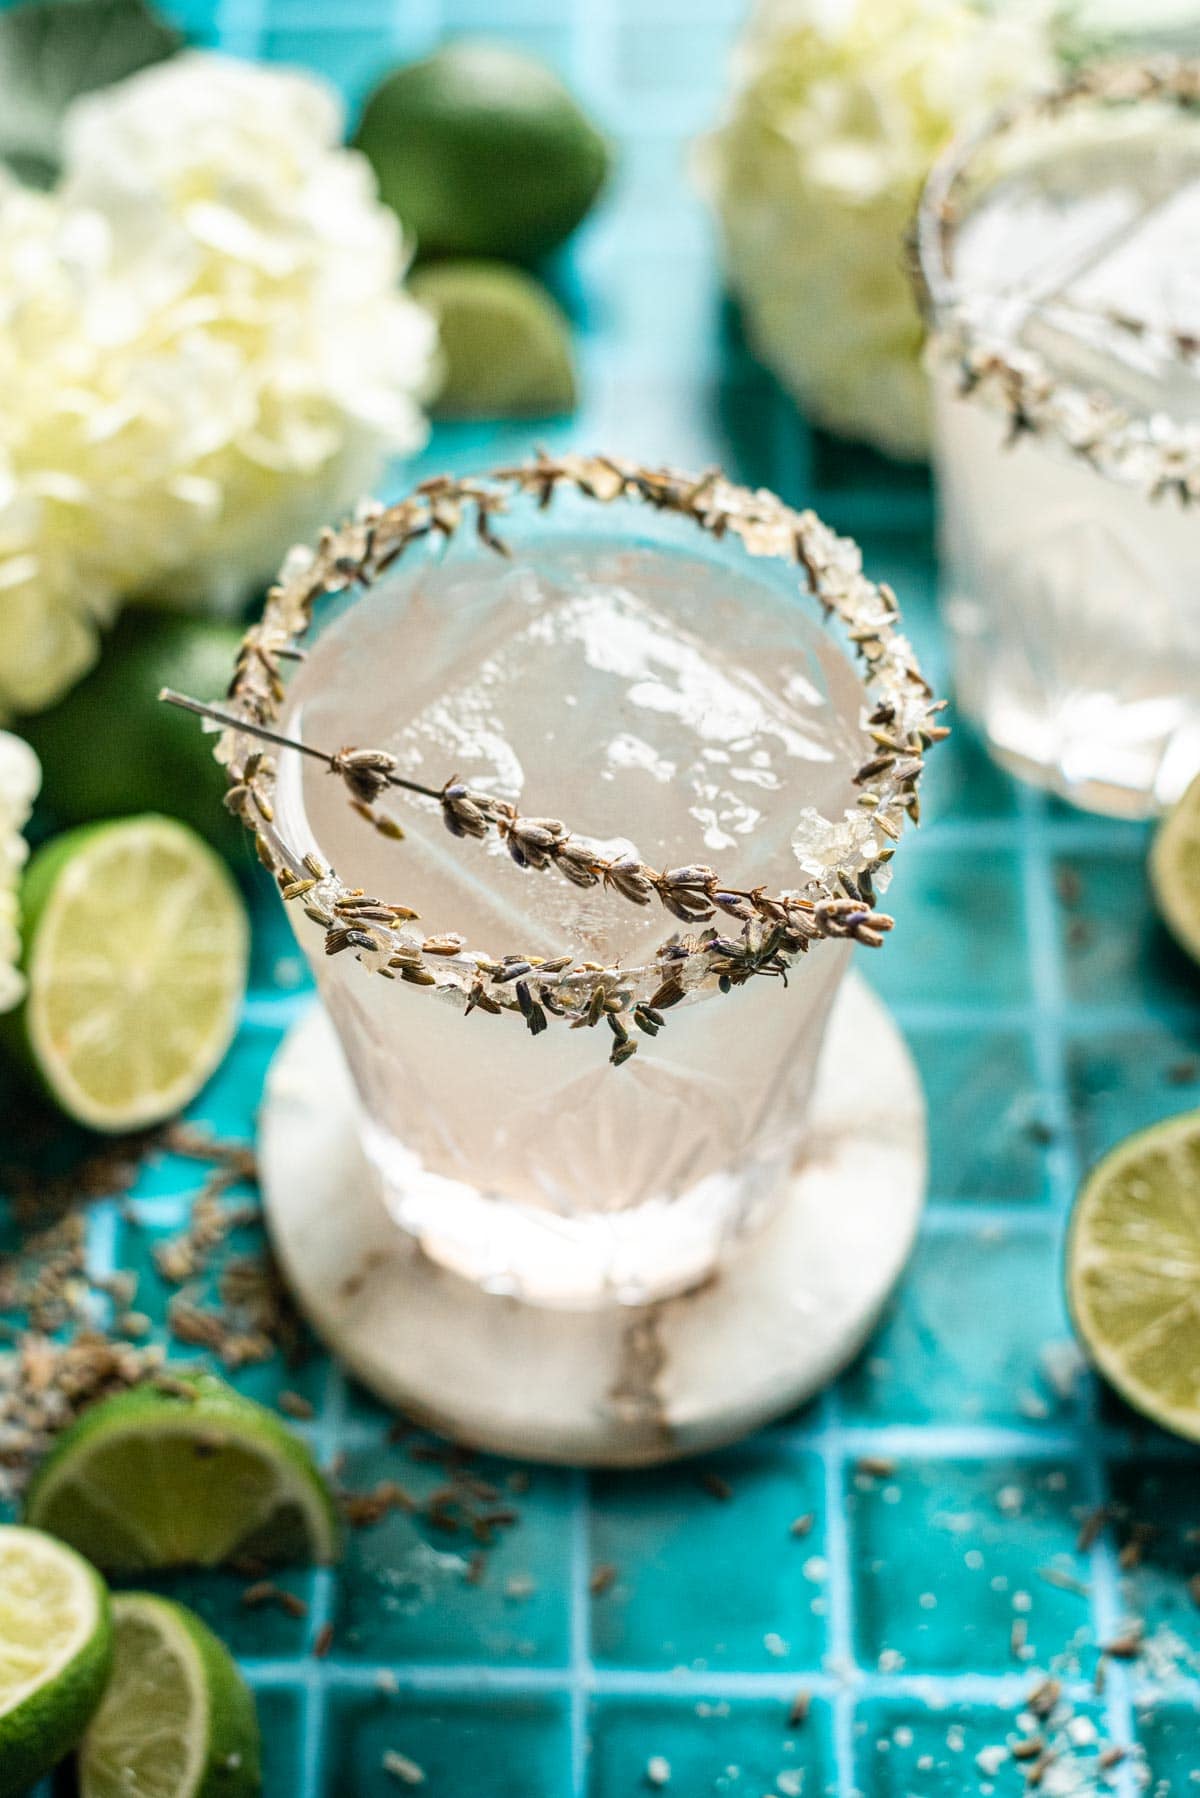 Lavender margarita in a cut glass with a salt and lavender rim on a teal tile table.